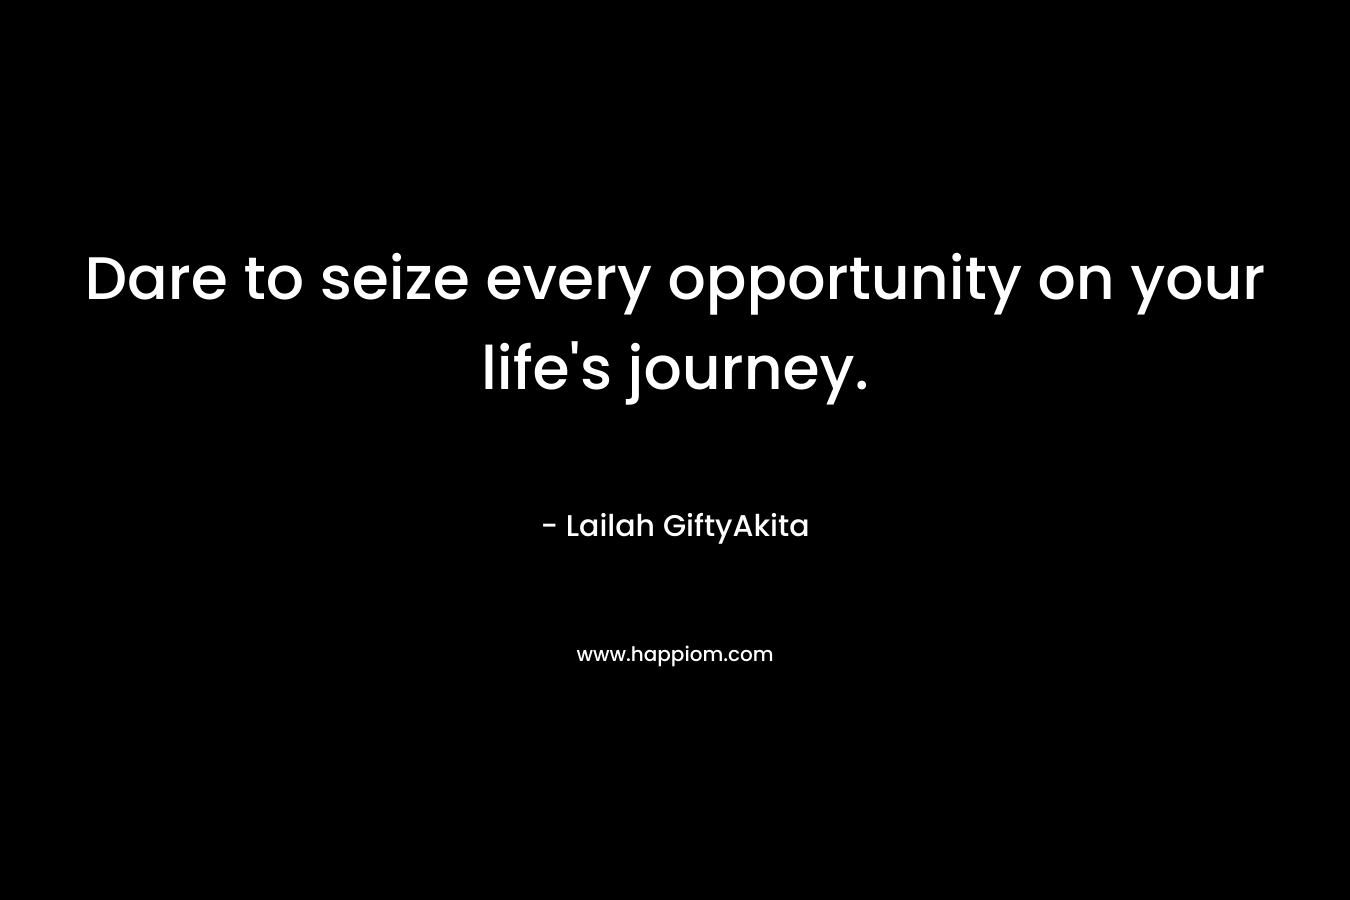 Dare to seize every opportunity on your life’s journey. – Lailah GiftyAkita